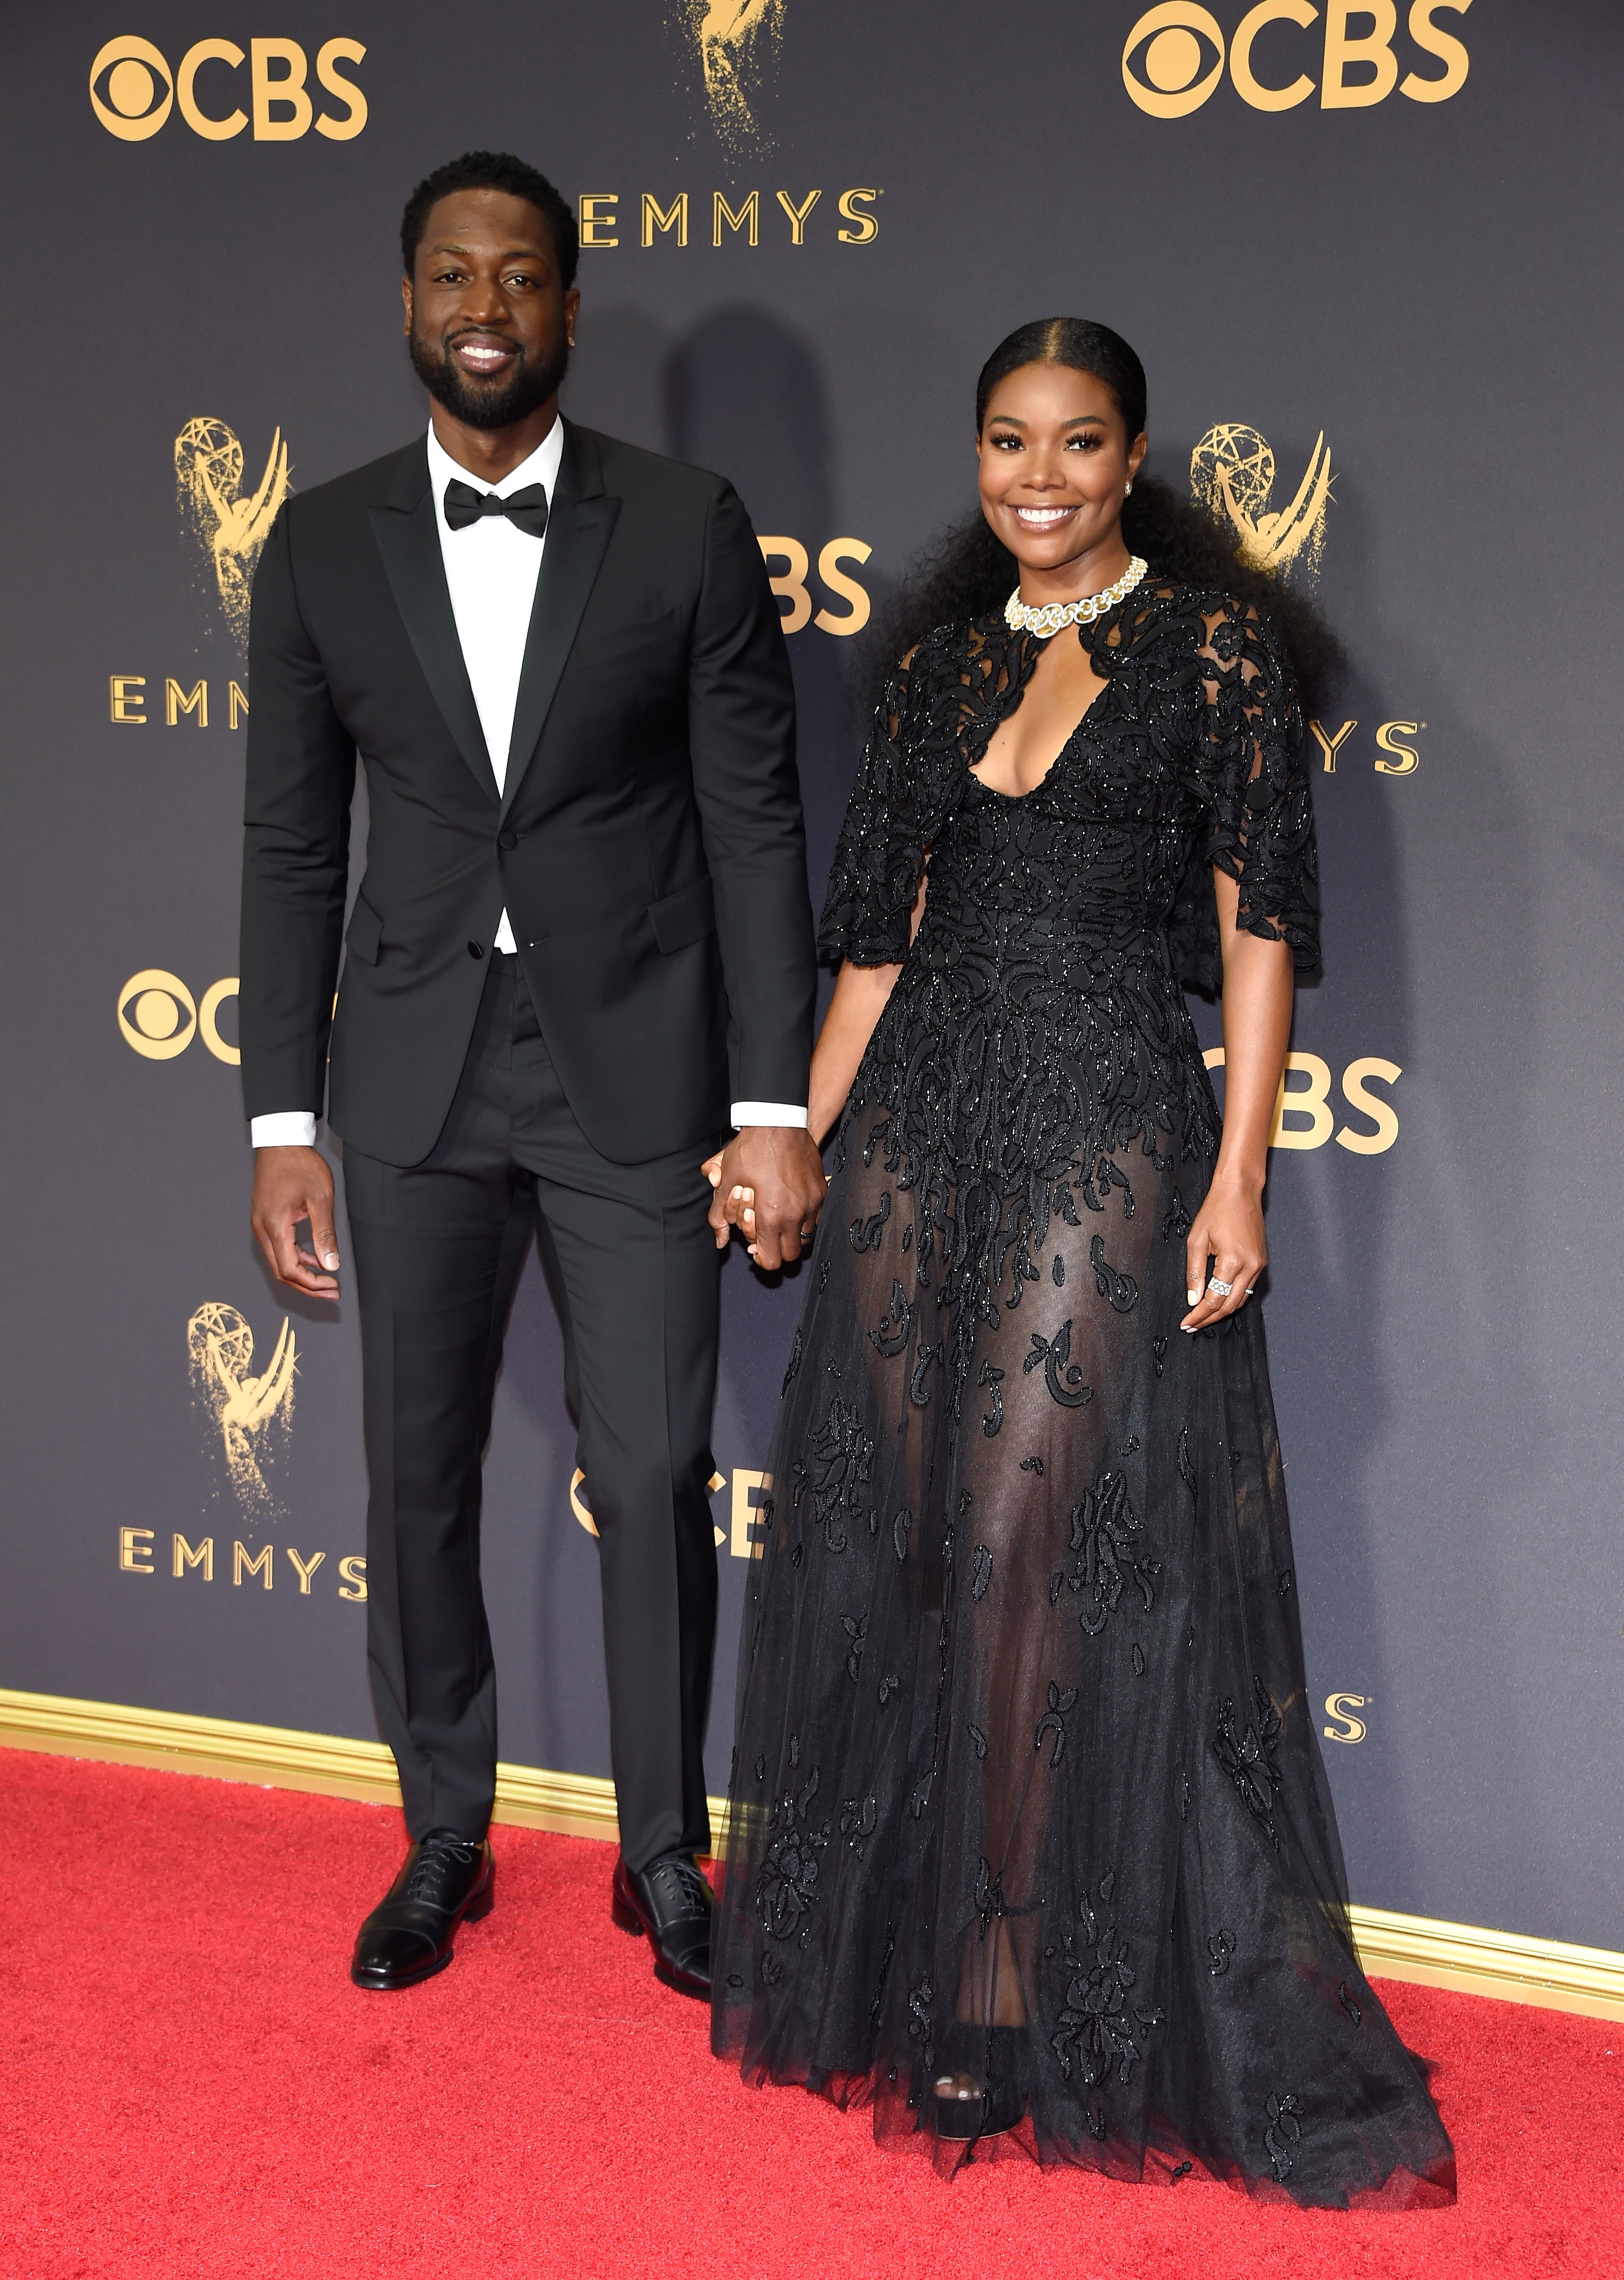 10 Moments From 2017 That Prove Gabrielle Union And Dwyane Wade Had the Best Year Ever
